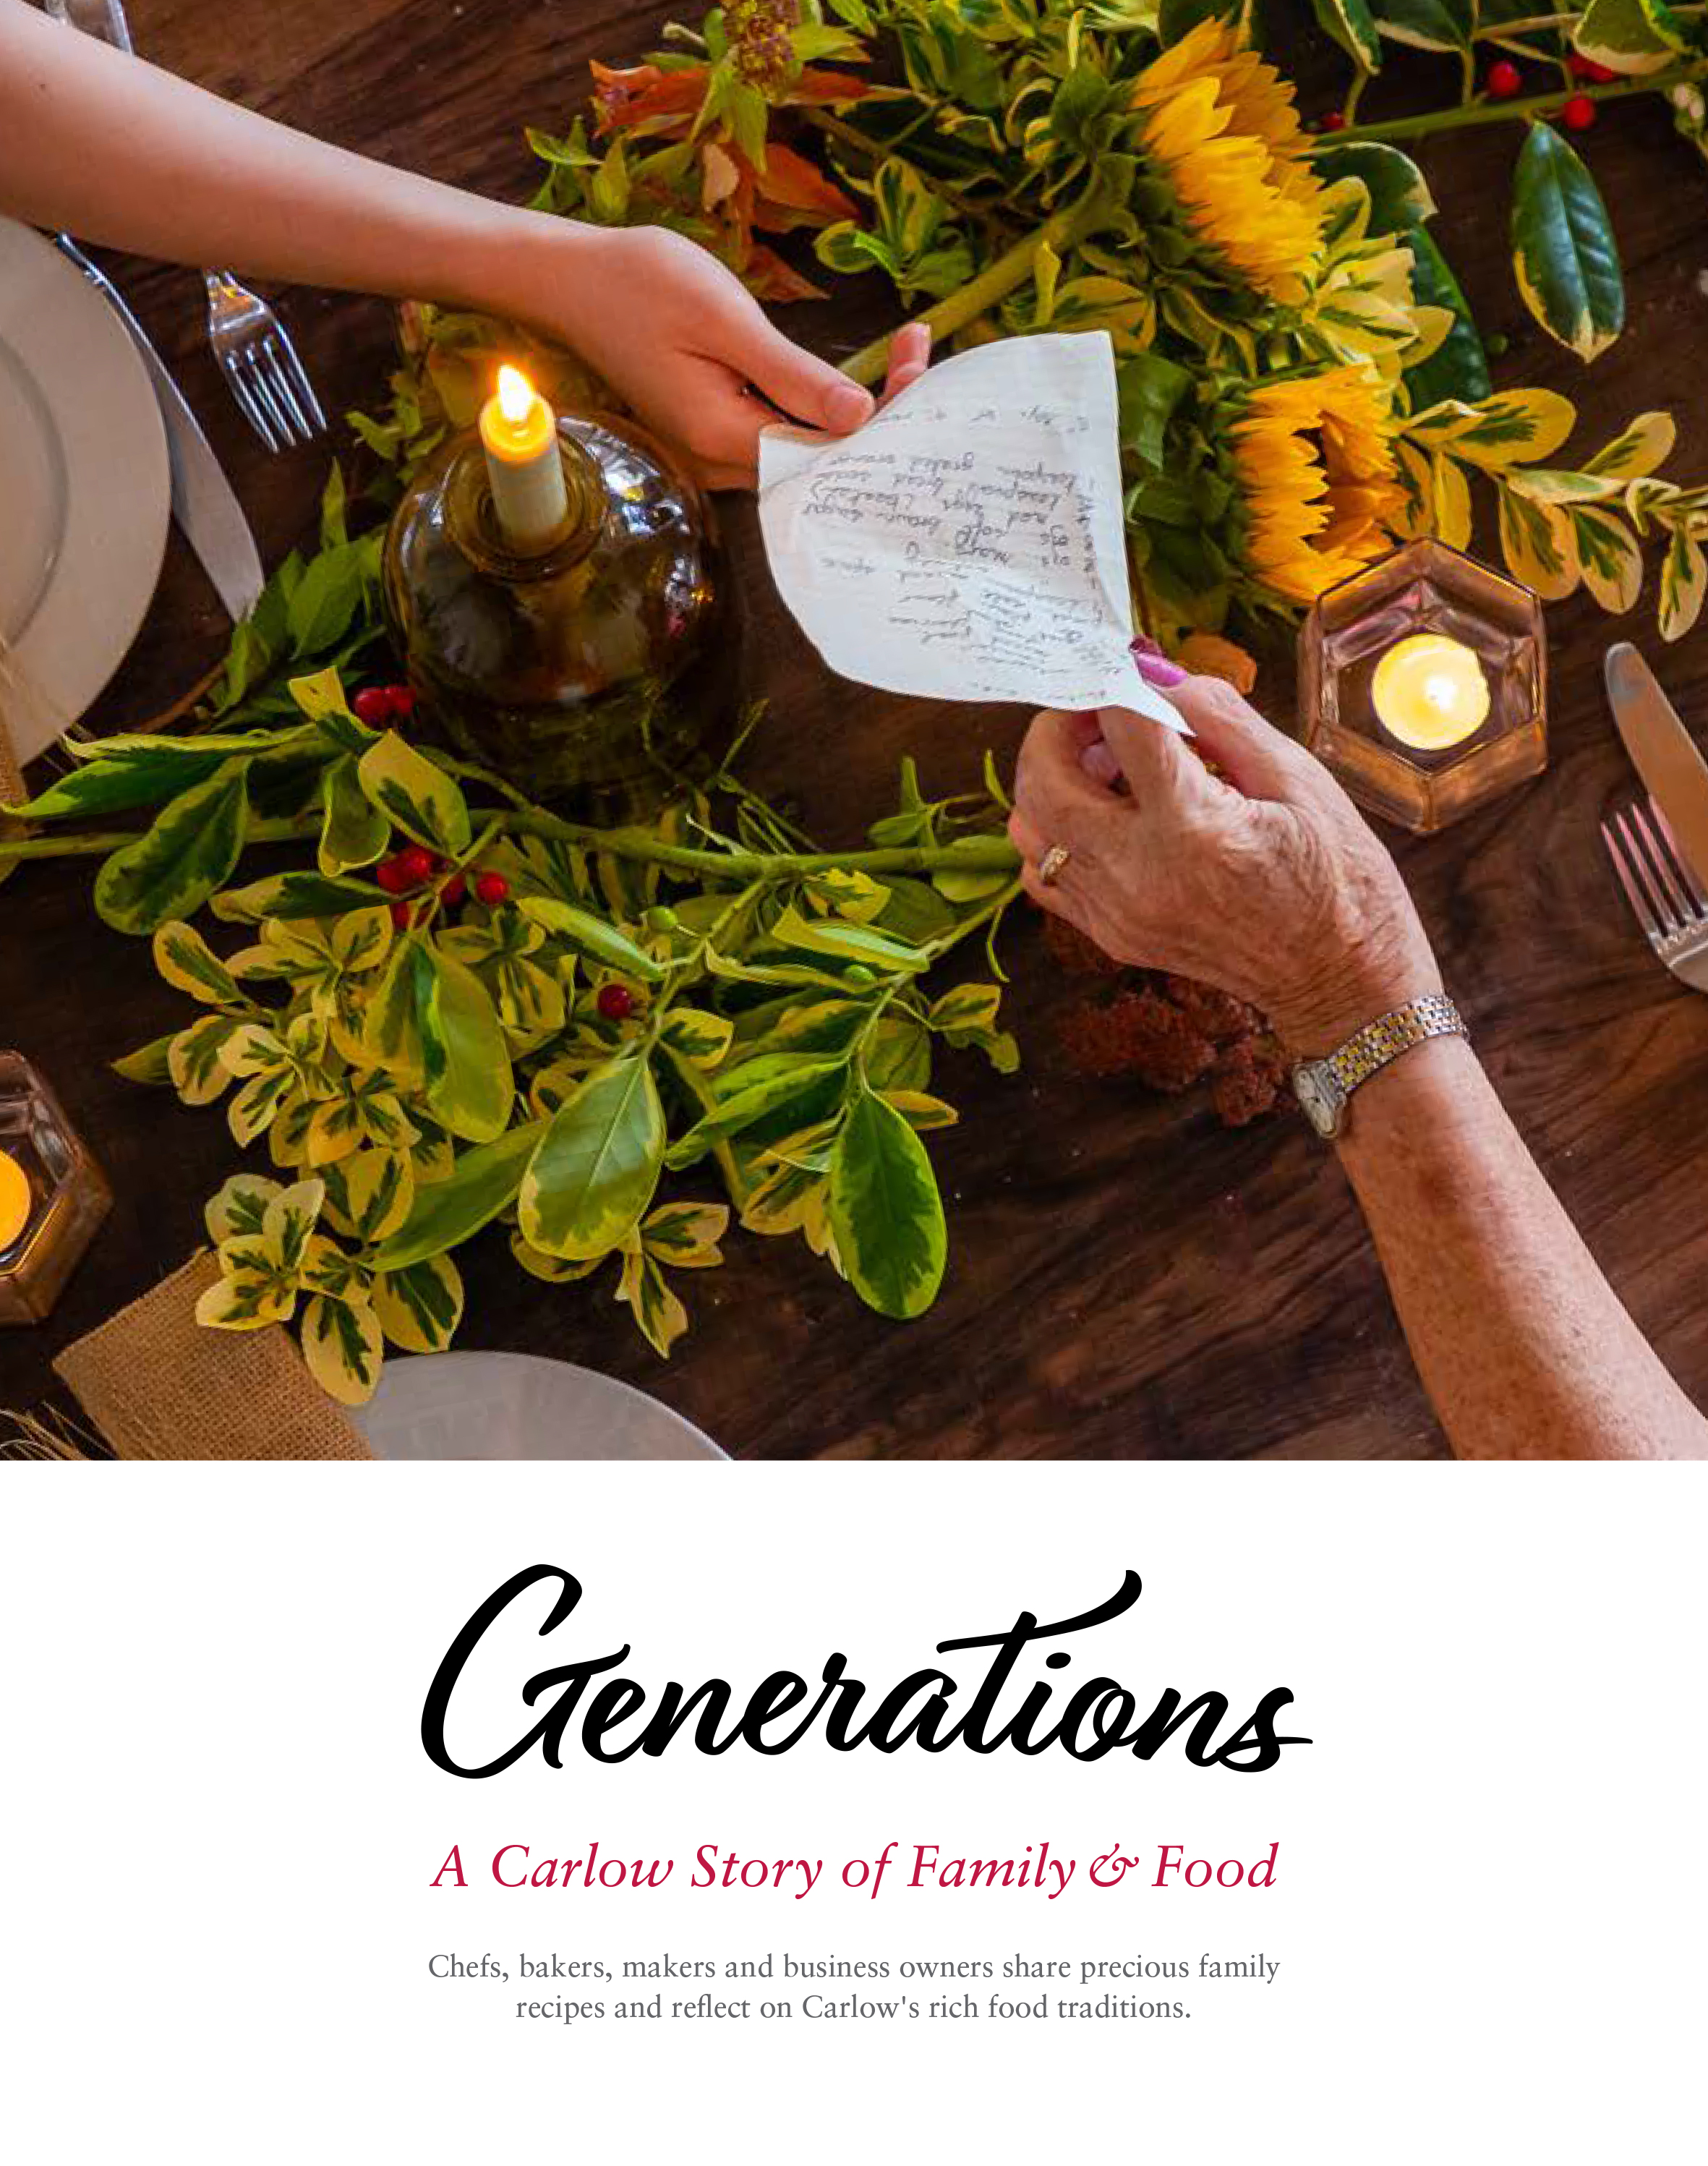 “Generations – a Carlow Story of Family & Food” 